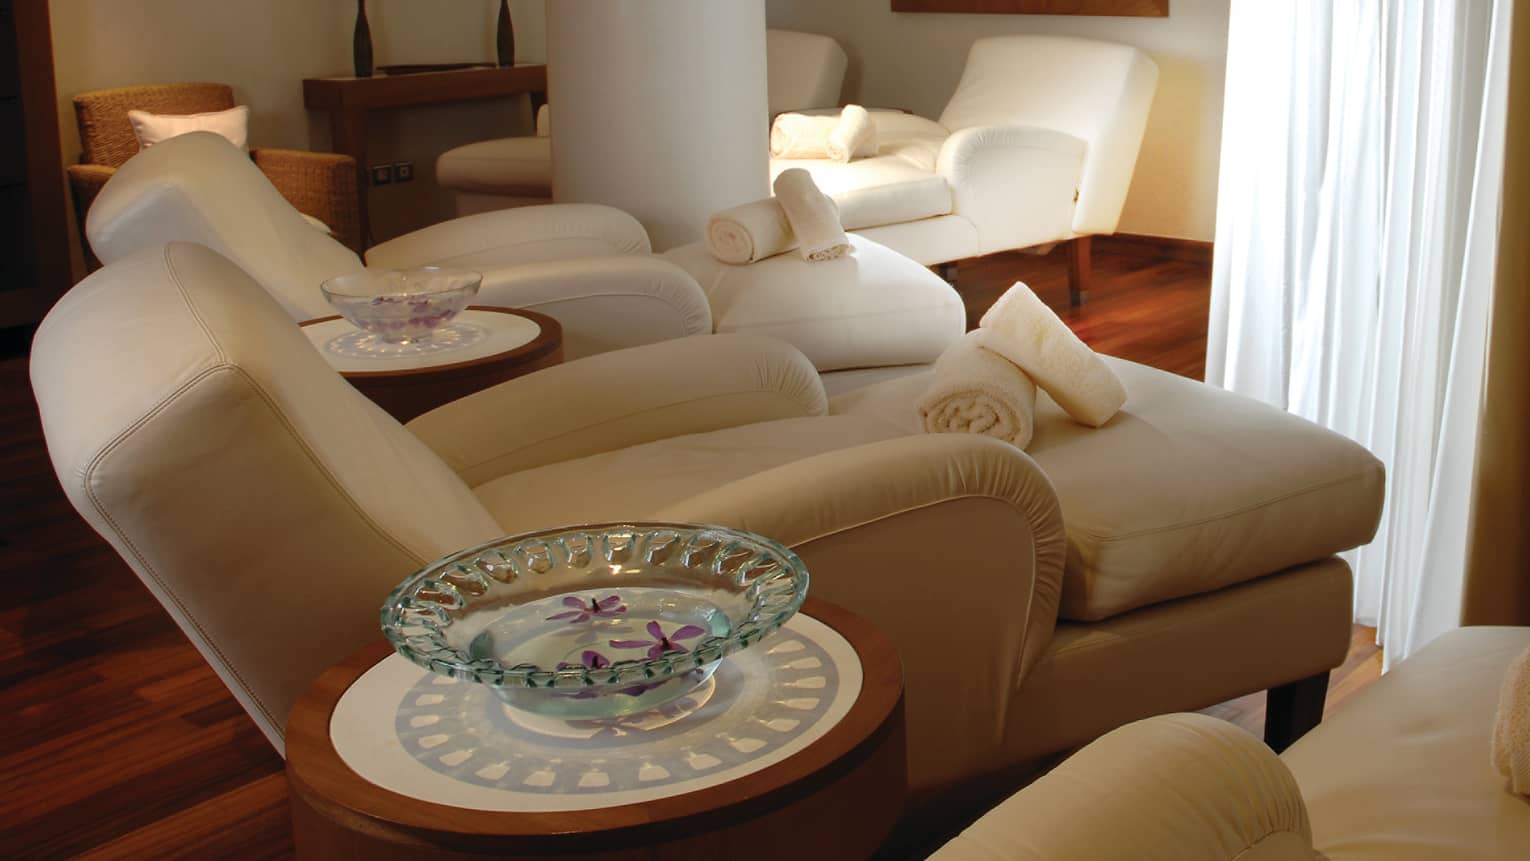 Three large plush chaise lounge sofas in dimly-lit spa room, rolled white towels